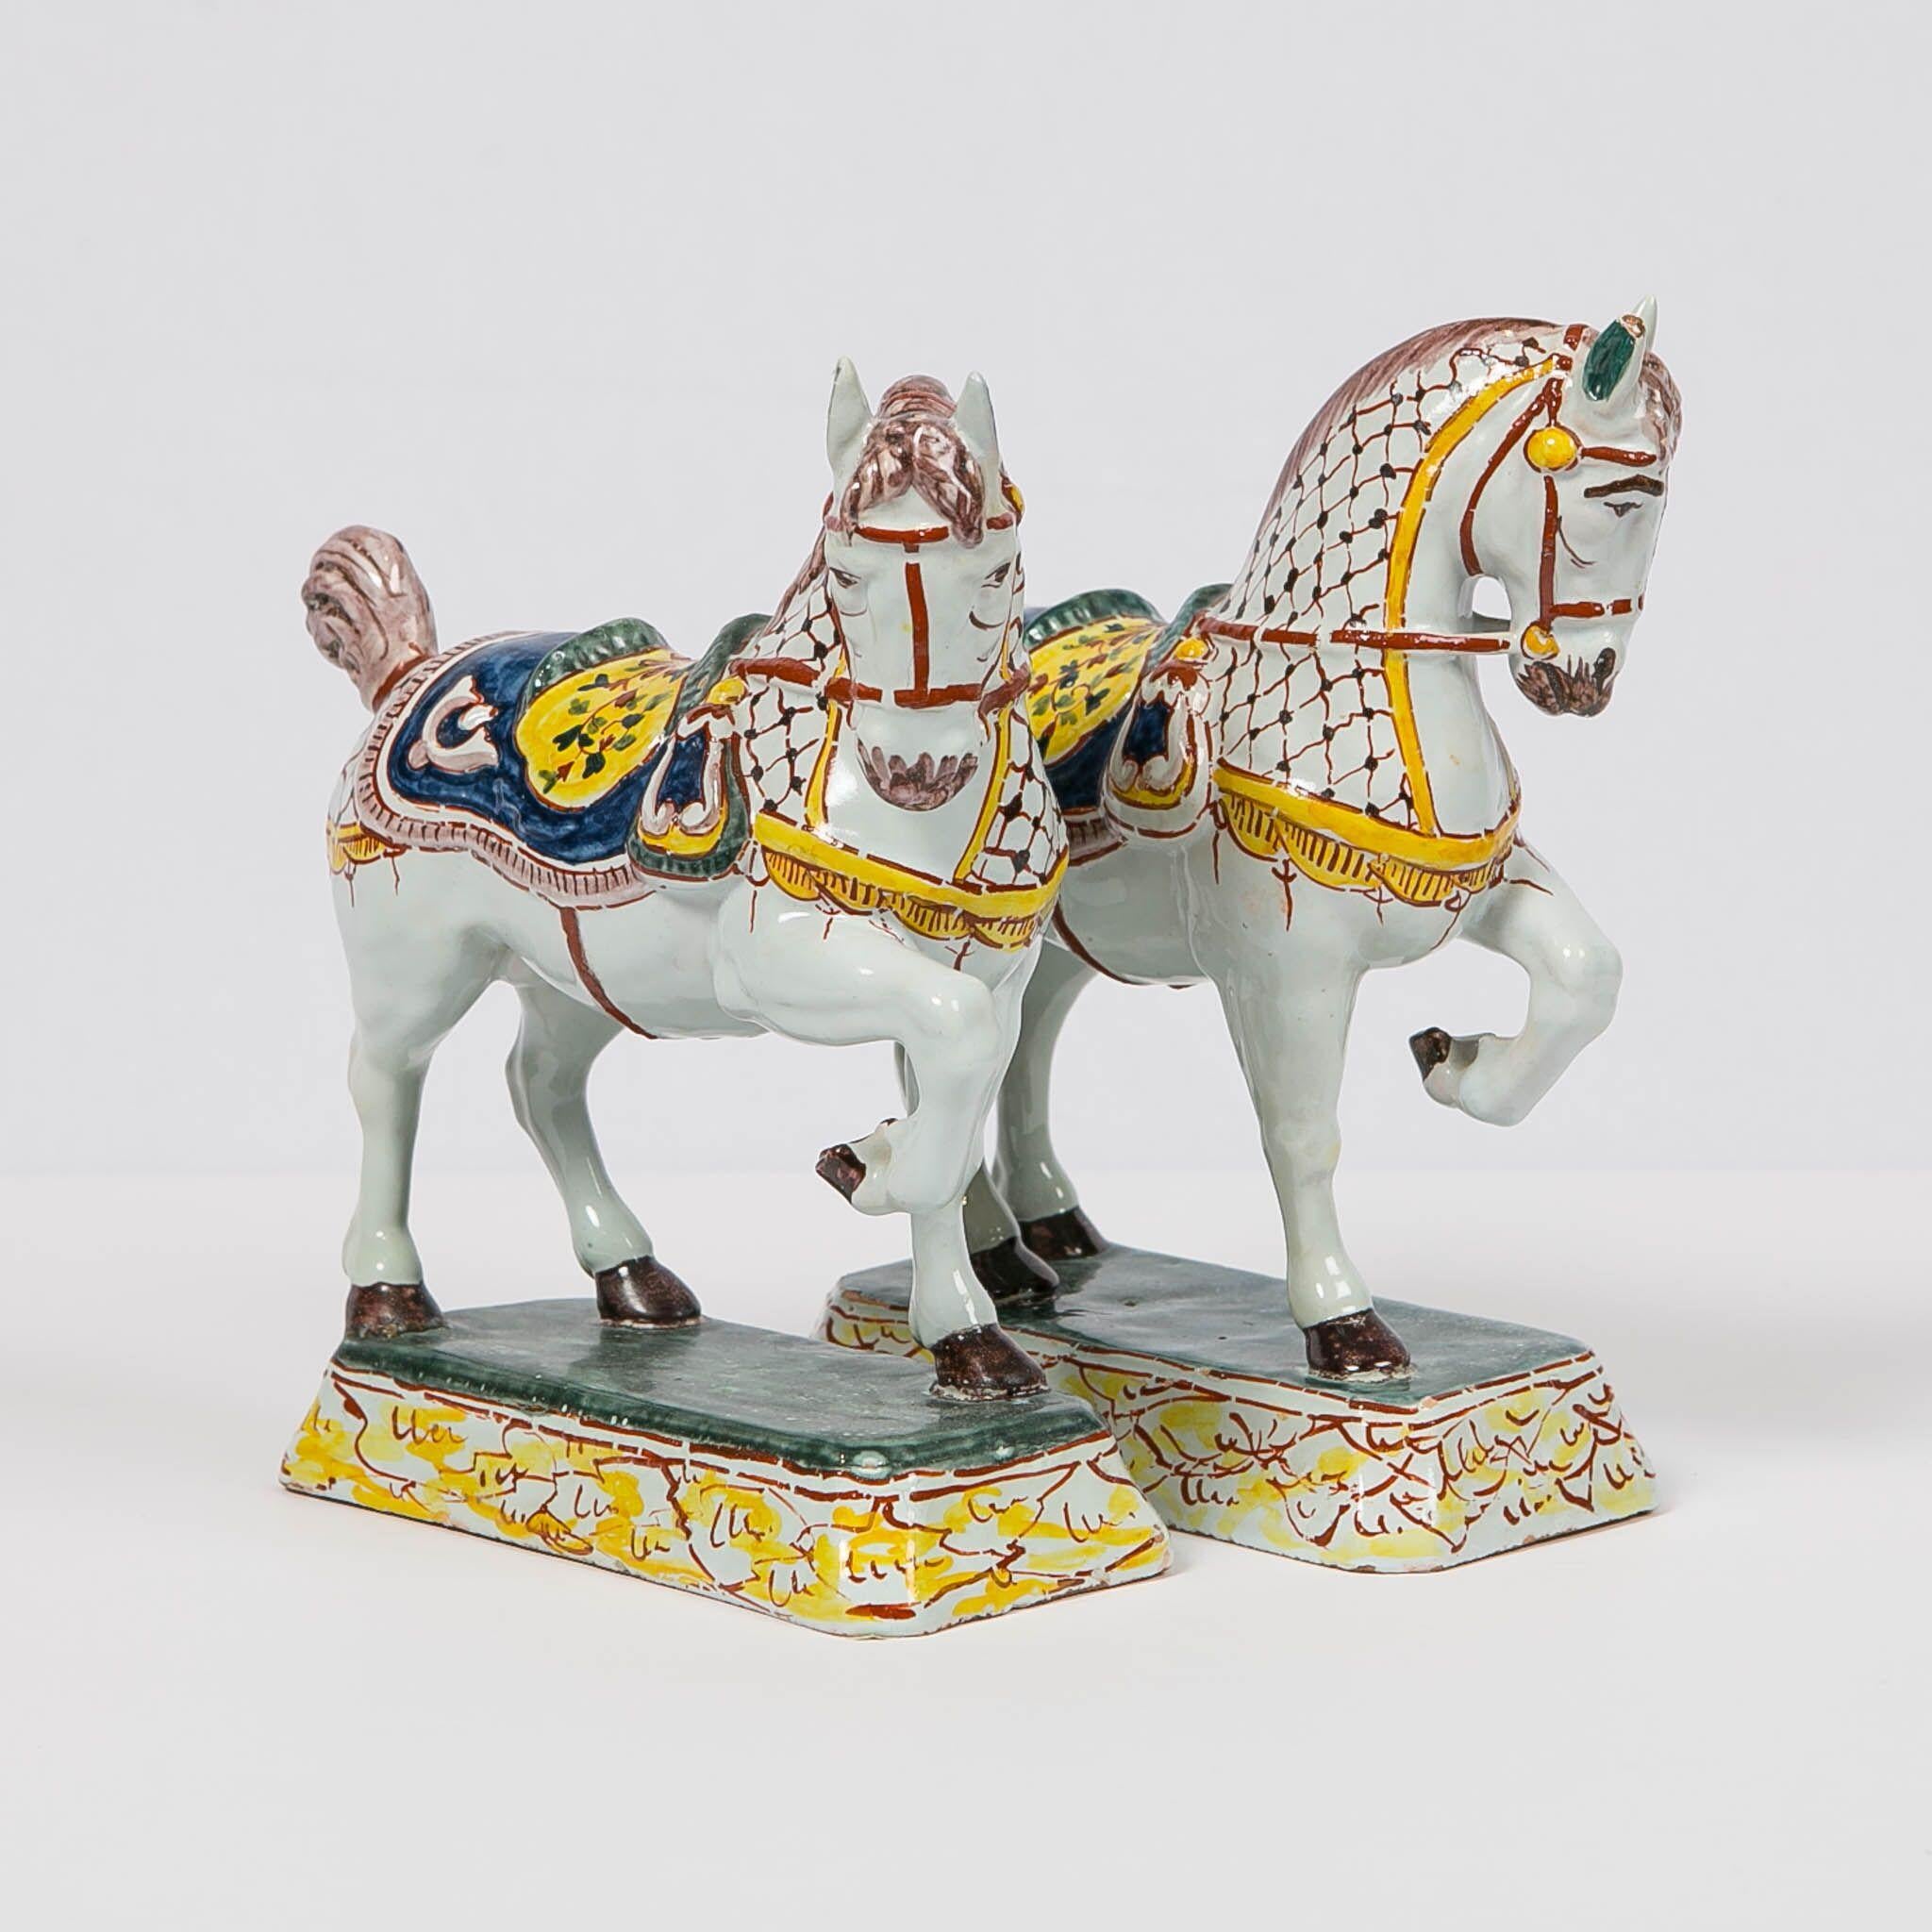 Glazed Dutch Delft Horses Hand Painted in Polychrome Colors Made Mid-19th Century, Pair